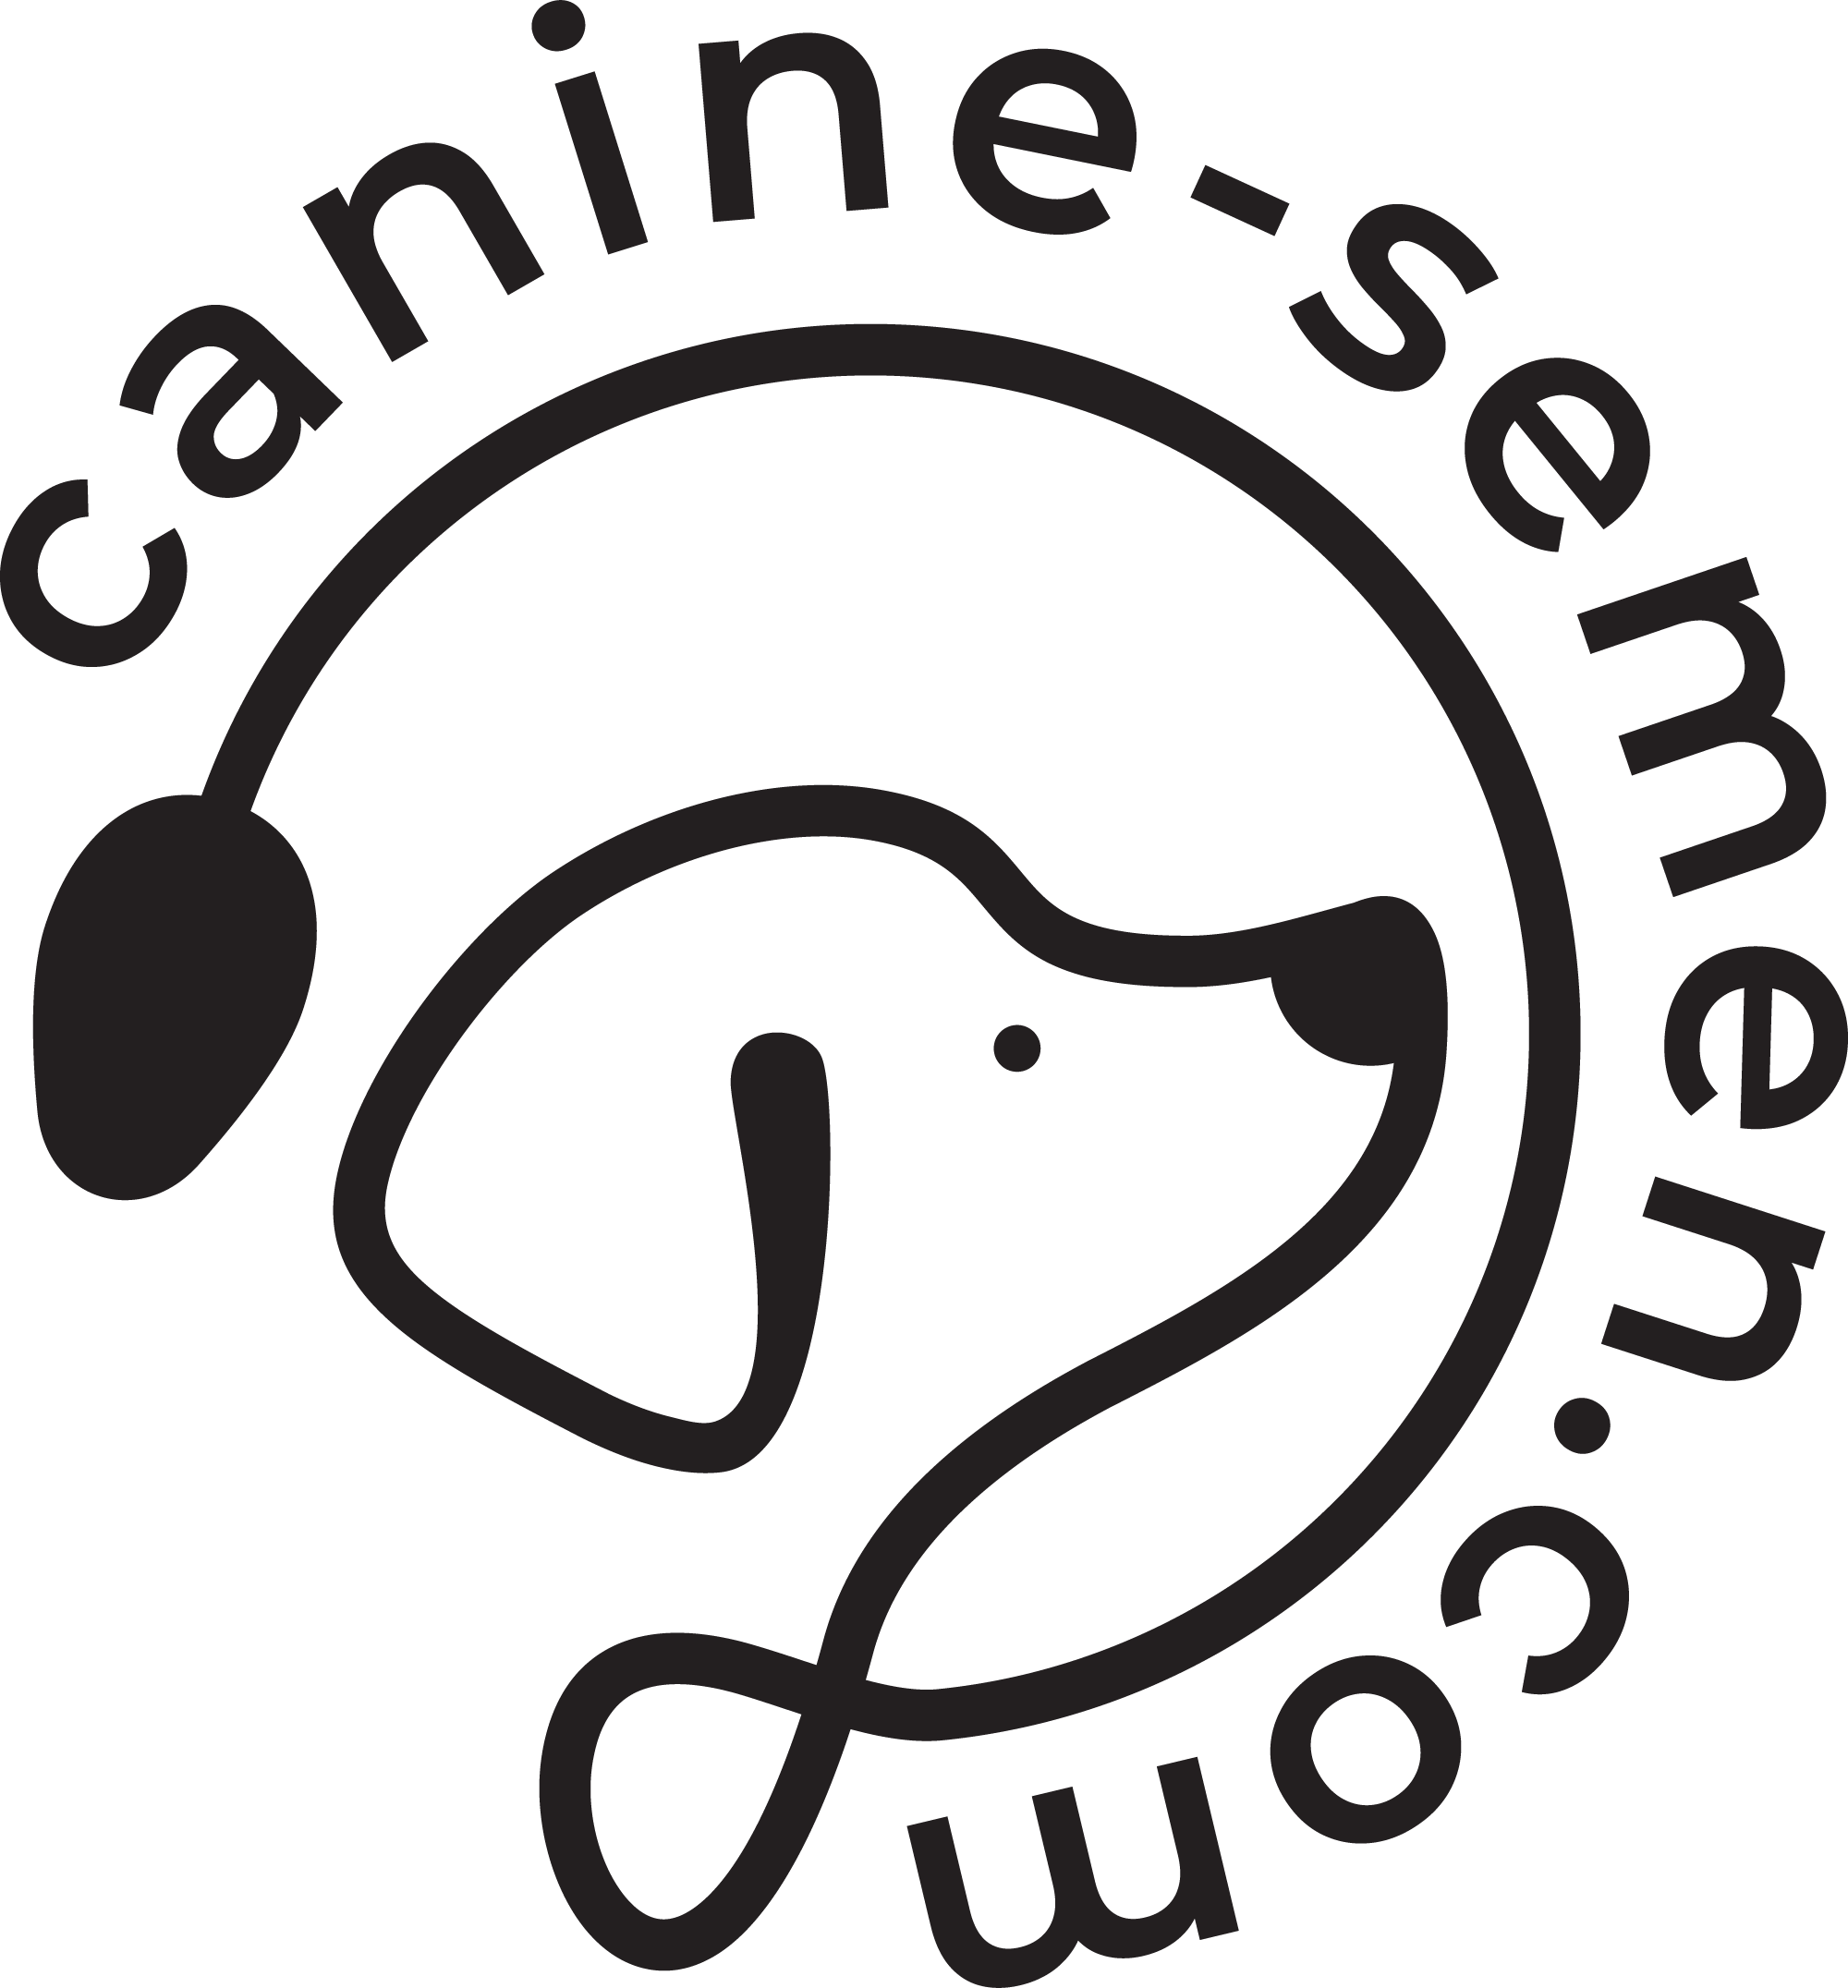 Canine reproduction service 